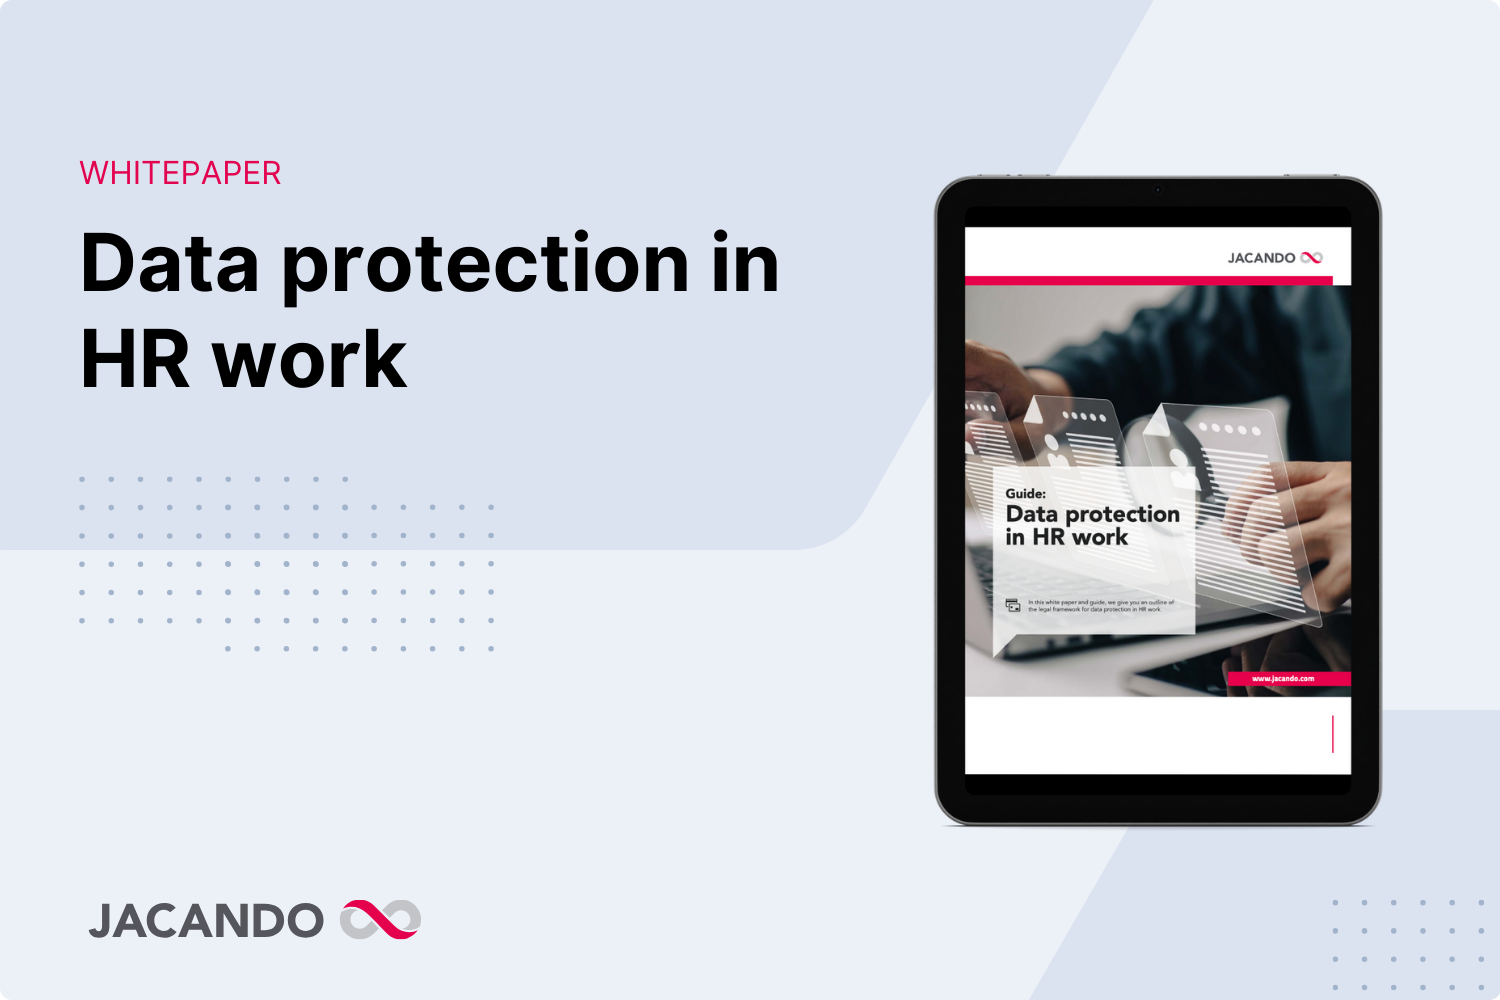 Whitepaper - Data protection in HR work